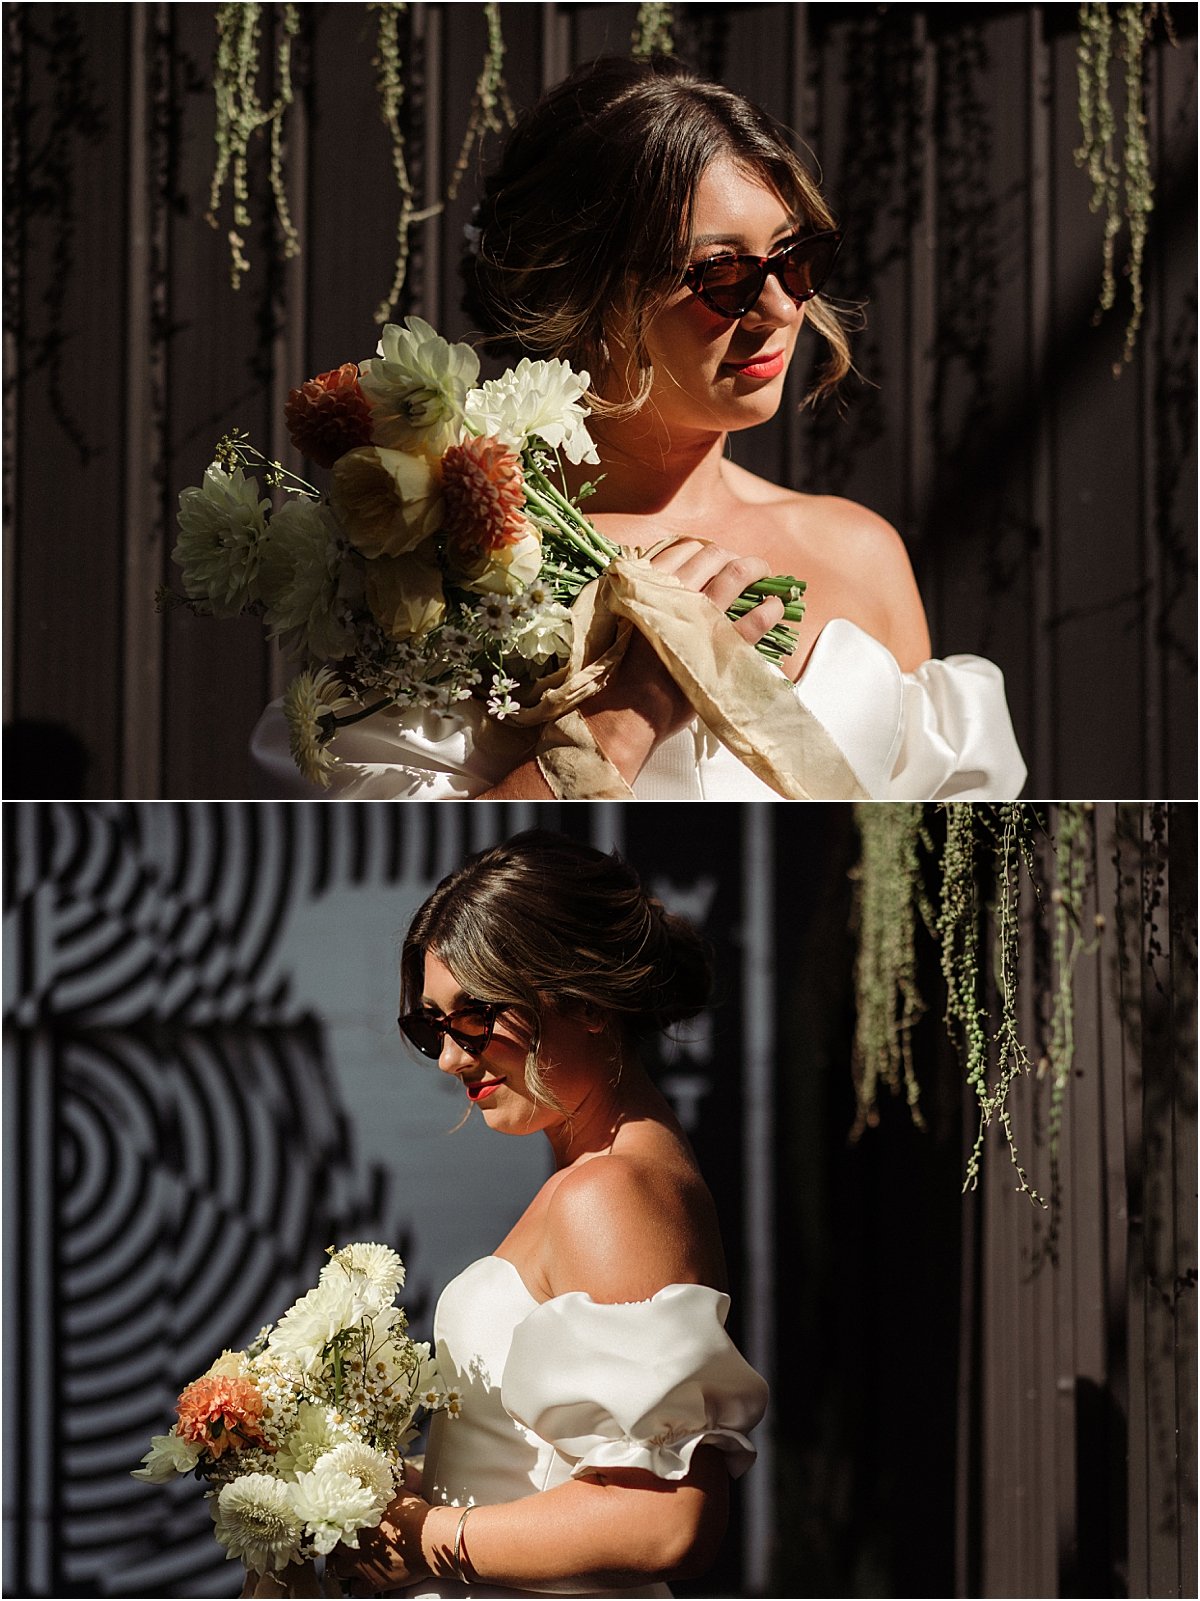 Bride standing in front of black wall wearing cat eye sunglasses and wearing white wedding gown with puff sleeves